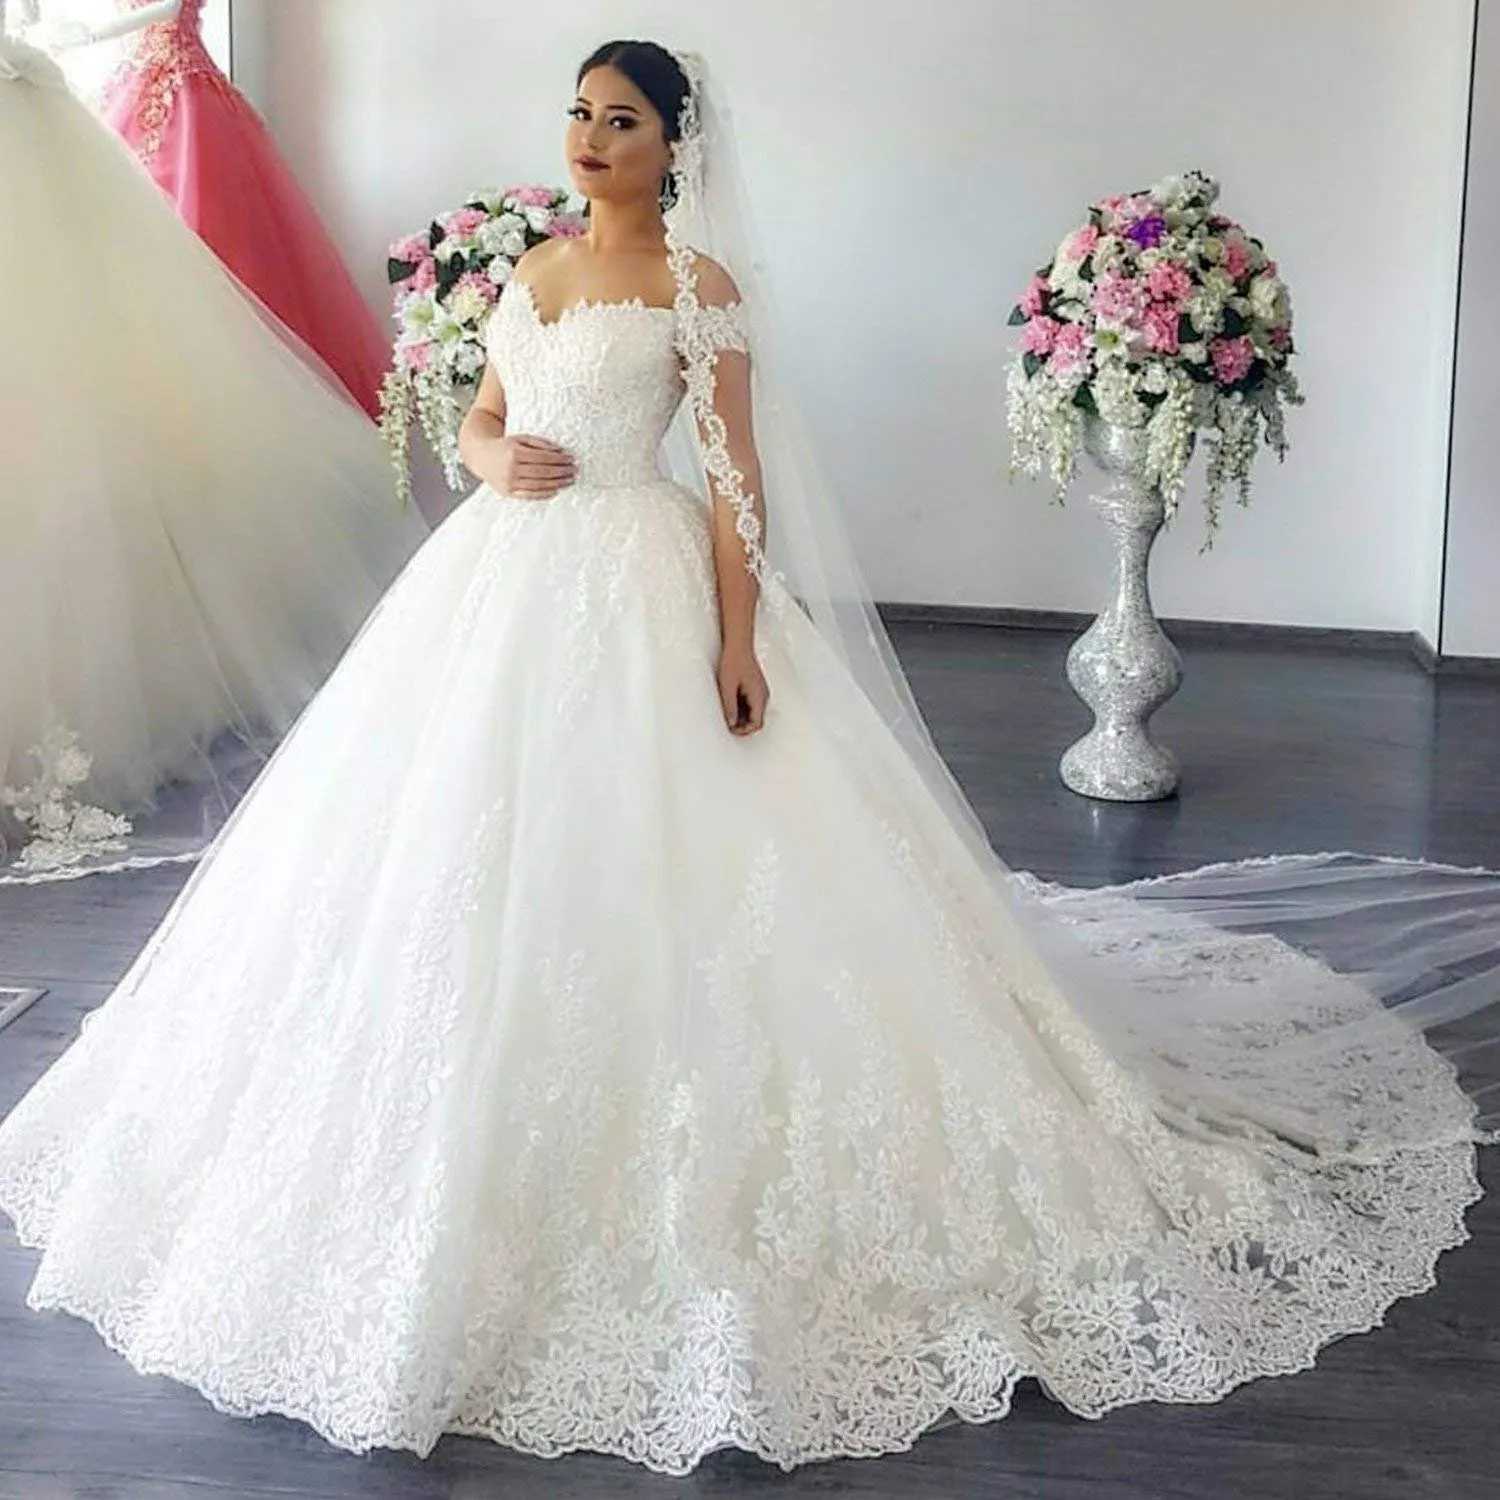 Luxury Lace Princess Off the Shoulder Wedding Dresses Sweetheart Sheer Back Princess Illusion Applique Bridal Gowns robe de mariage